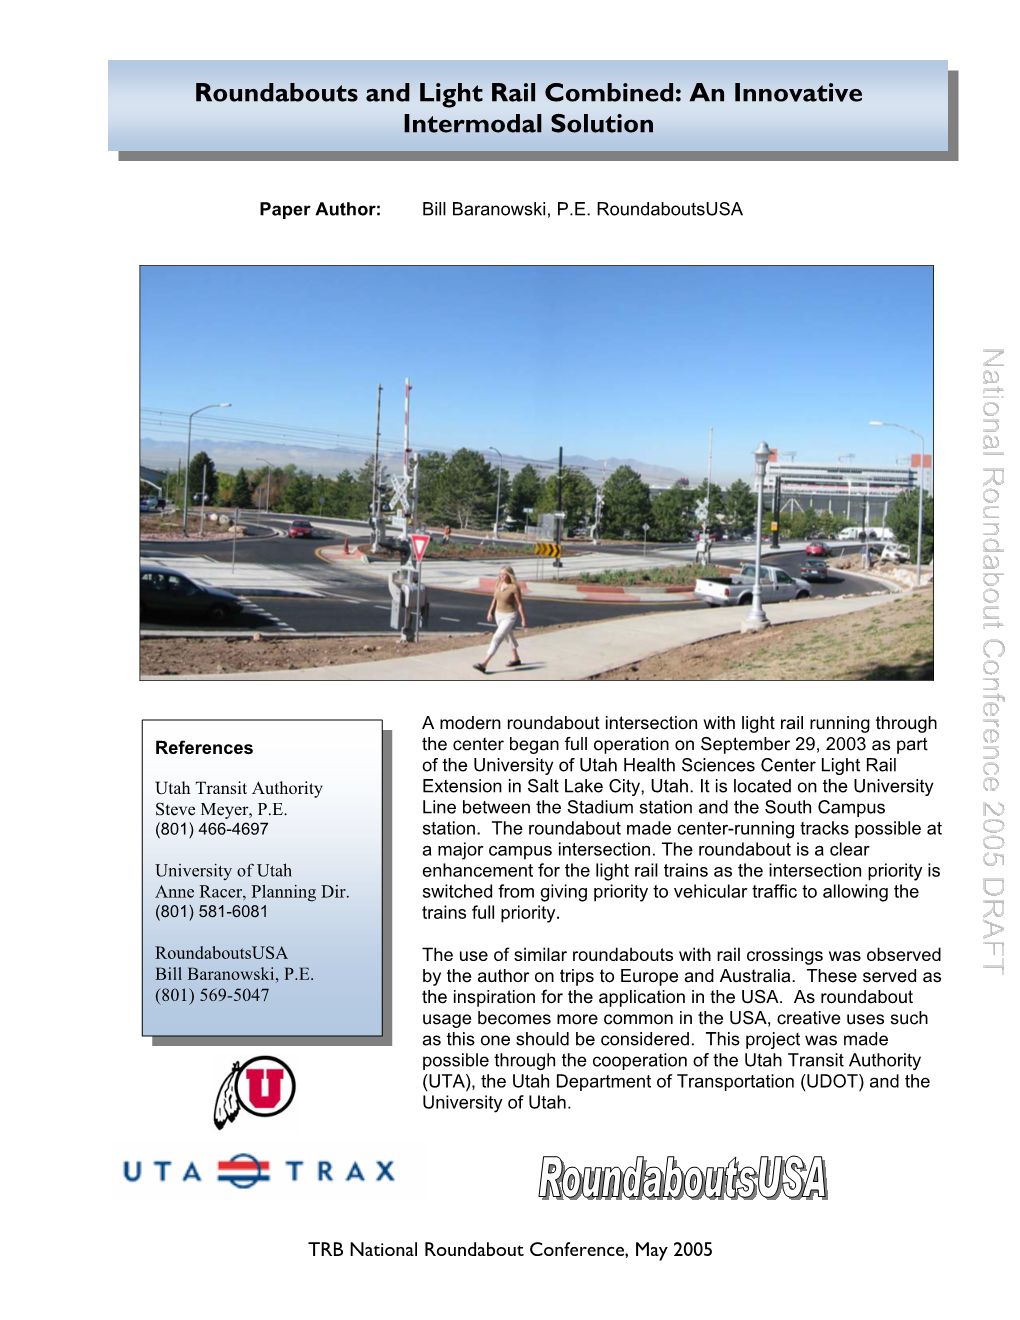 Roundabouts and Light Rail Combined: an Innovative Intermodal Solution